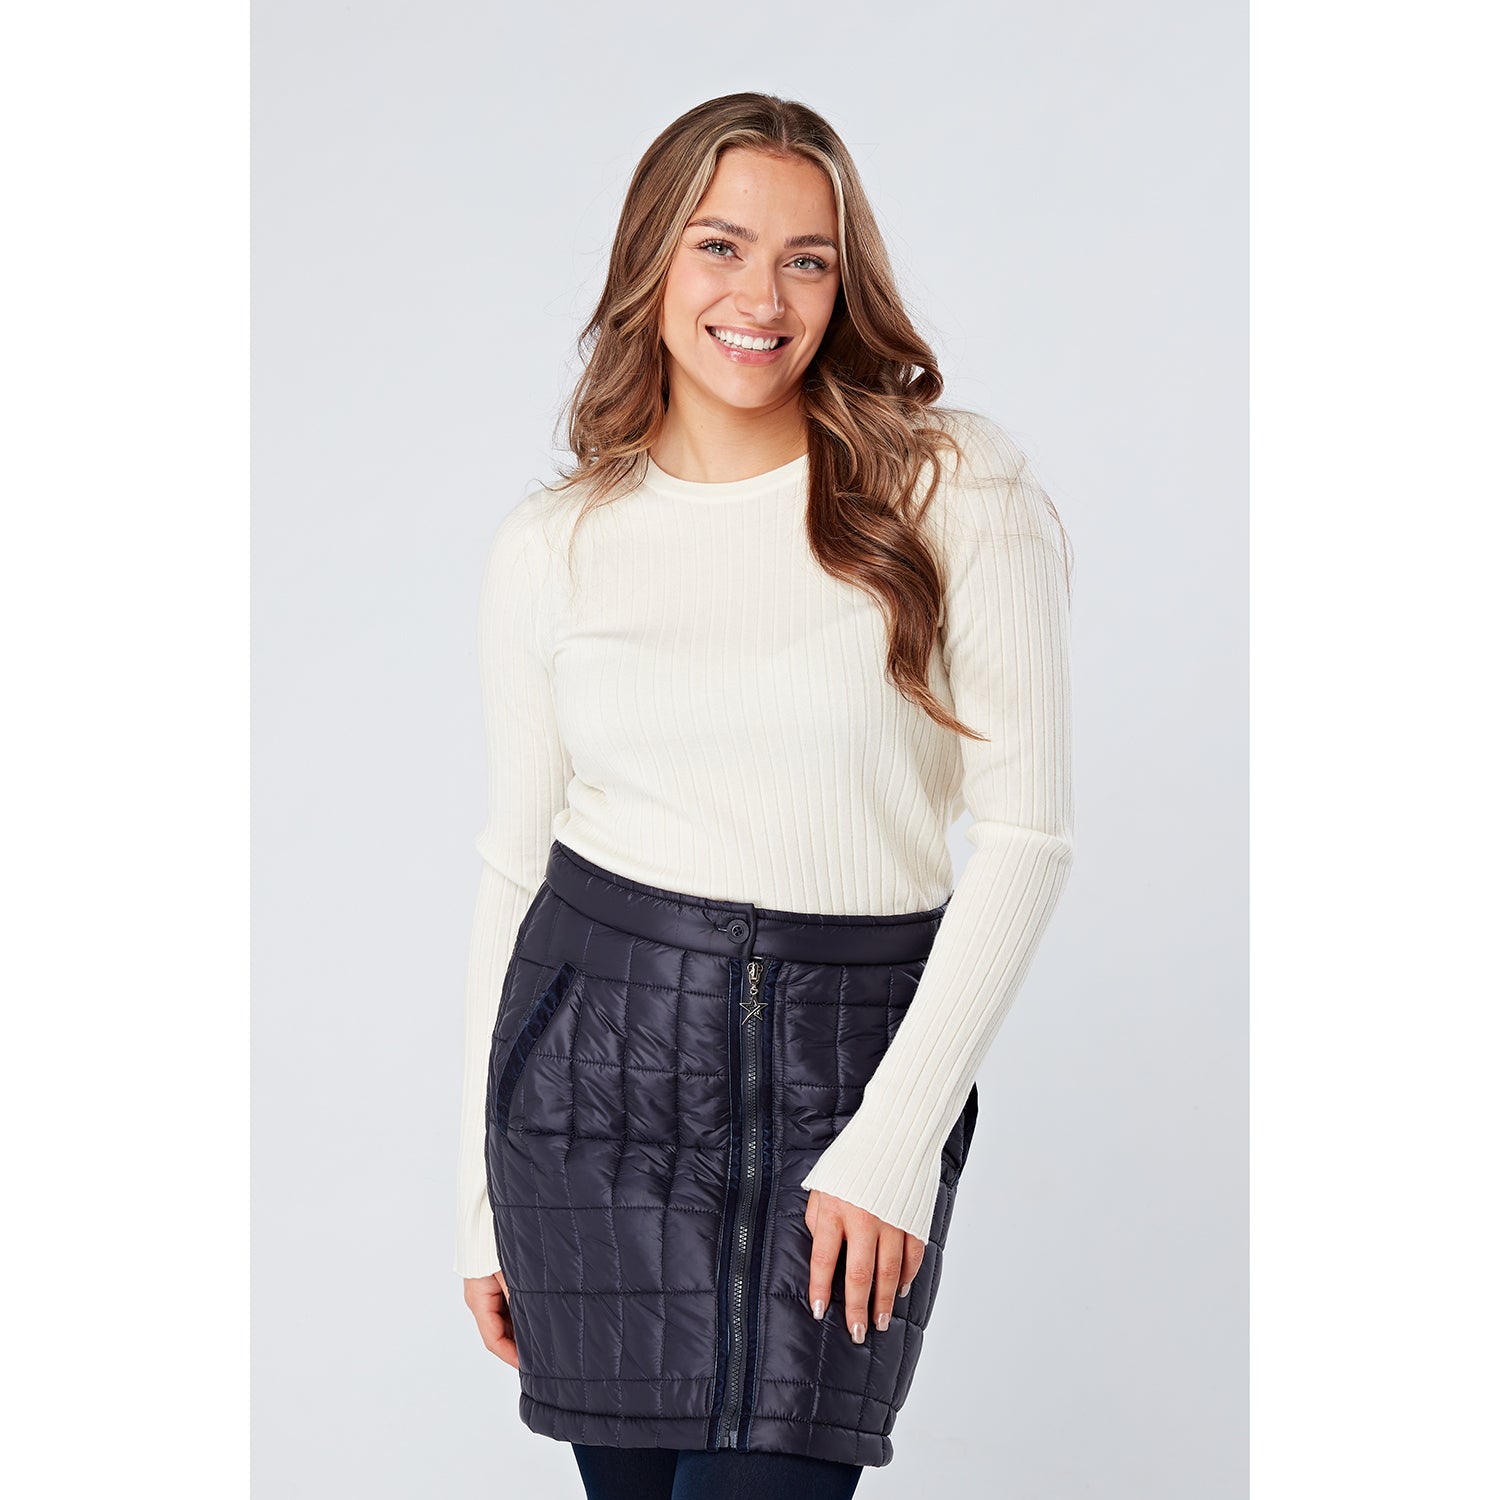 Swing Out Sister Ladies Ribbed Knit Sweater in Snow White